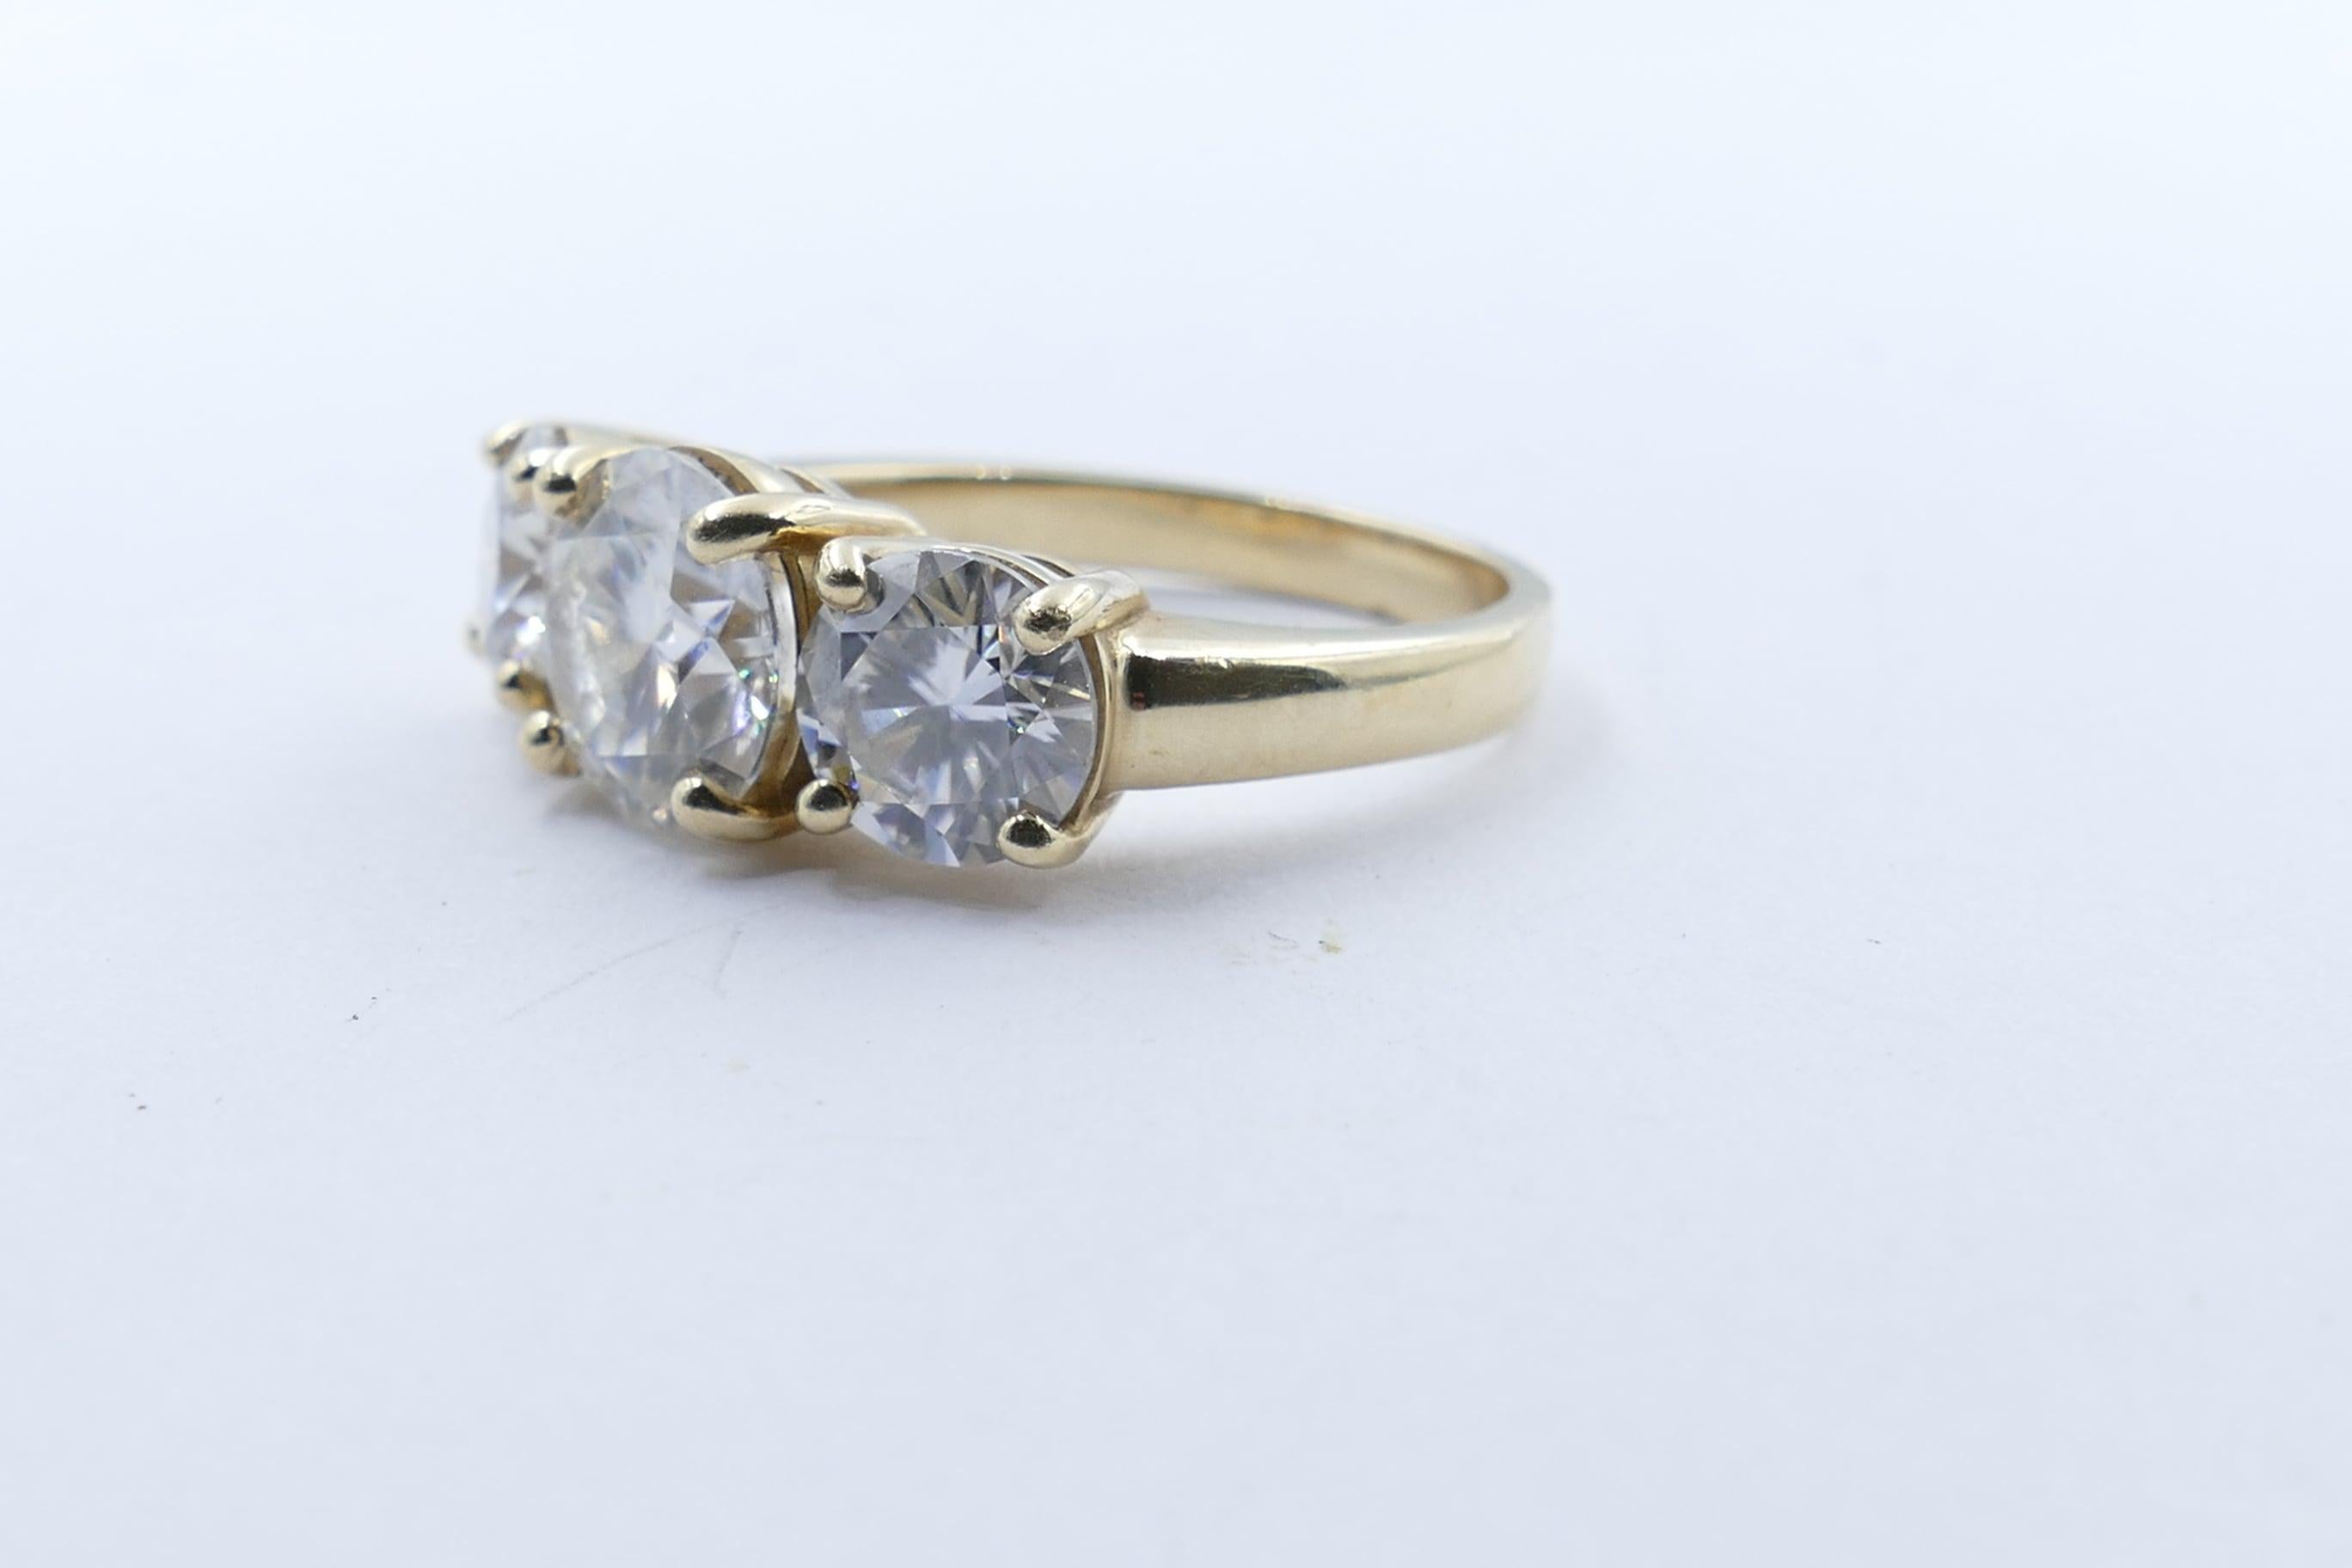 One 2 carat white Moissanite, 8.12 X 8.11 X 4.78,  VS clarity, forms the centrepiece of these beautiful looking Ring, set in 18 karat Yellow Gold.
It is 4 claw set & flanked by 2 other Moissanites , slightly smaller but of similar standard in colour